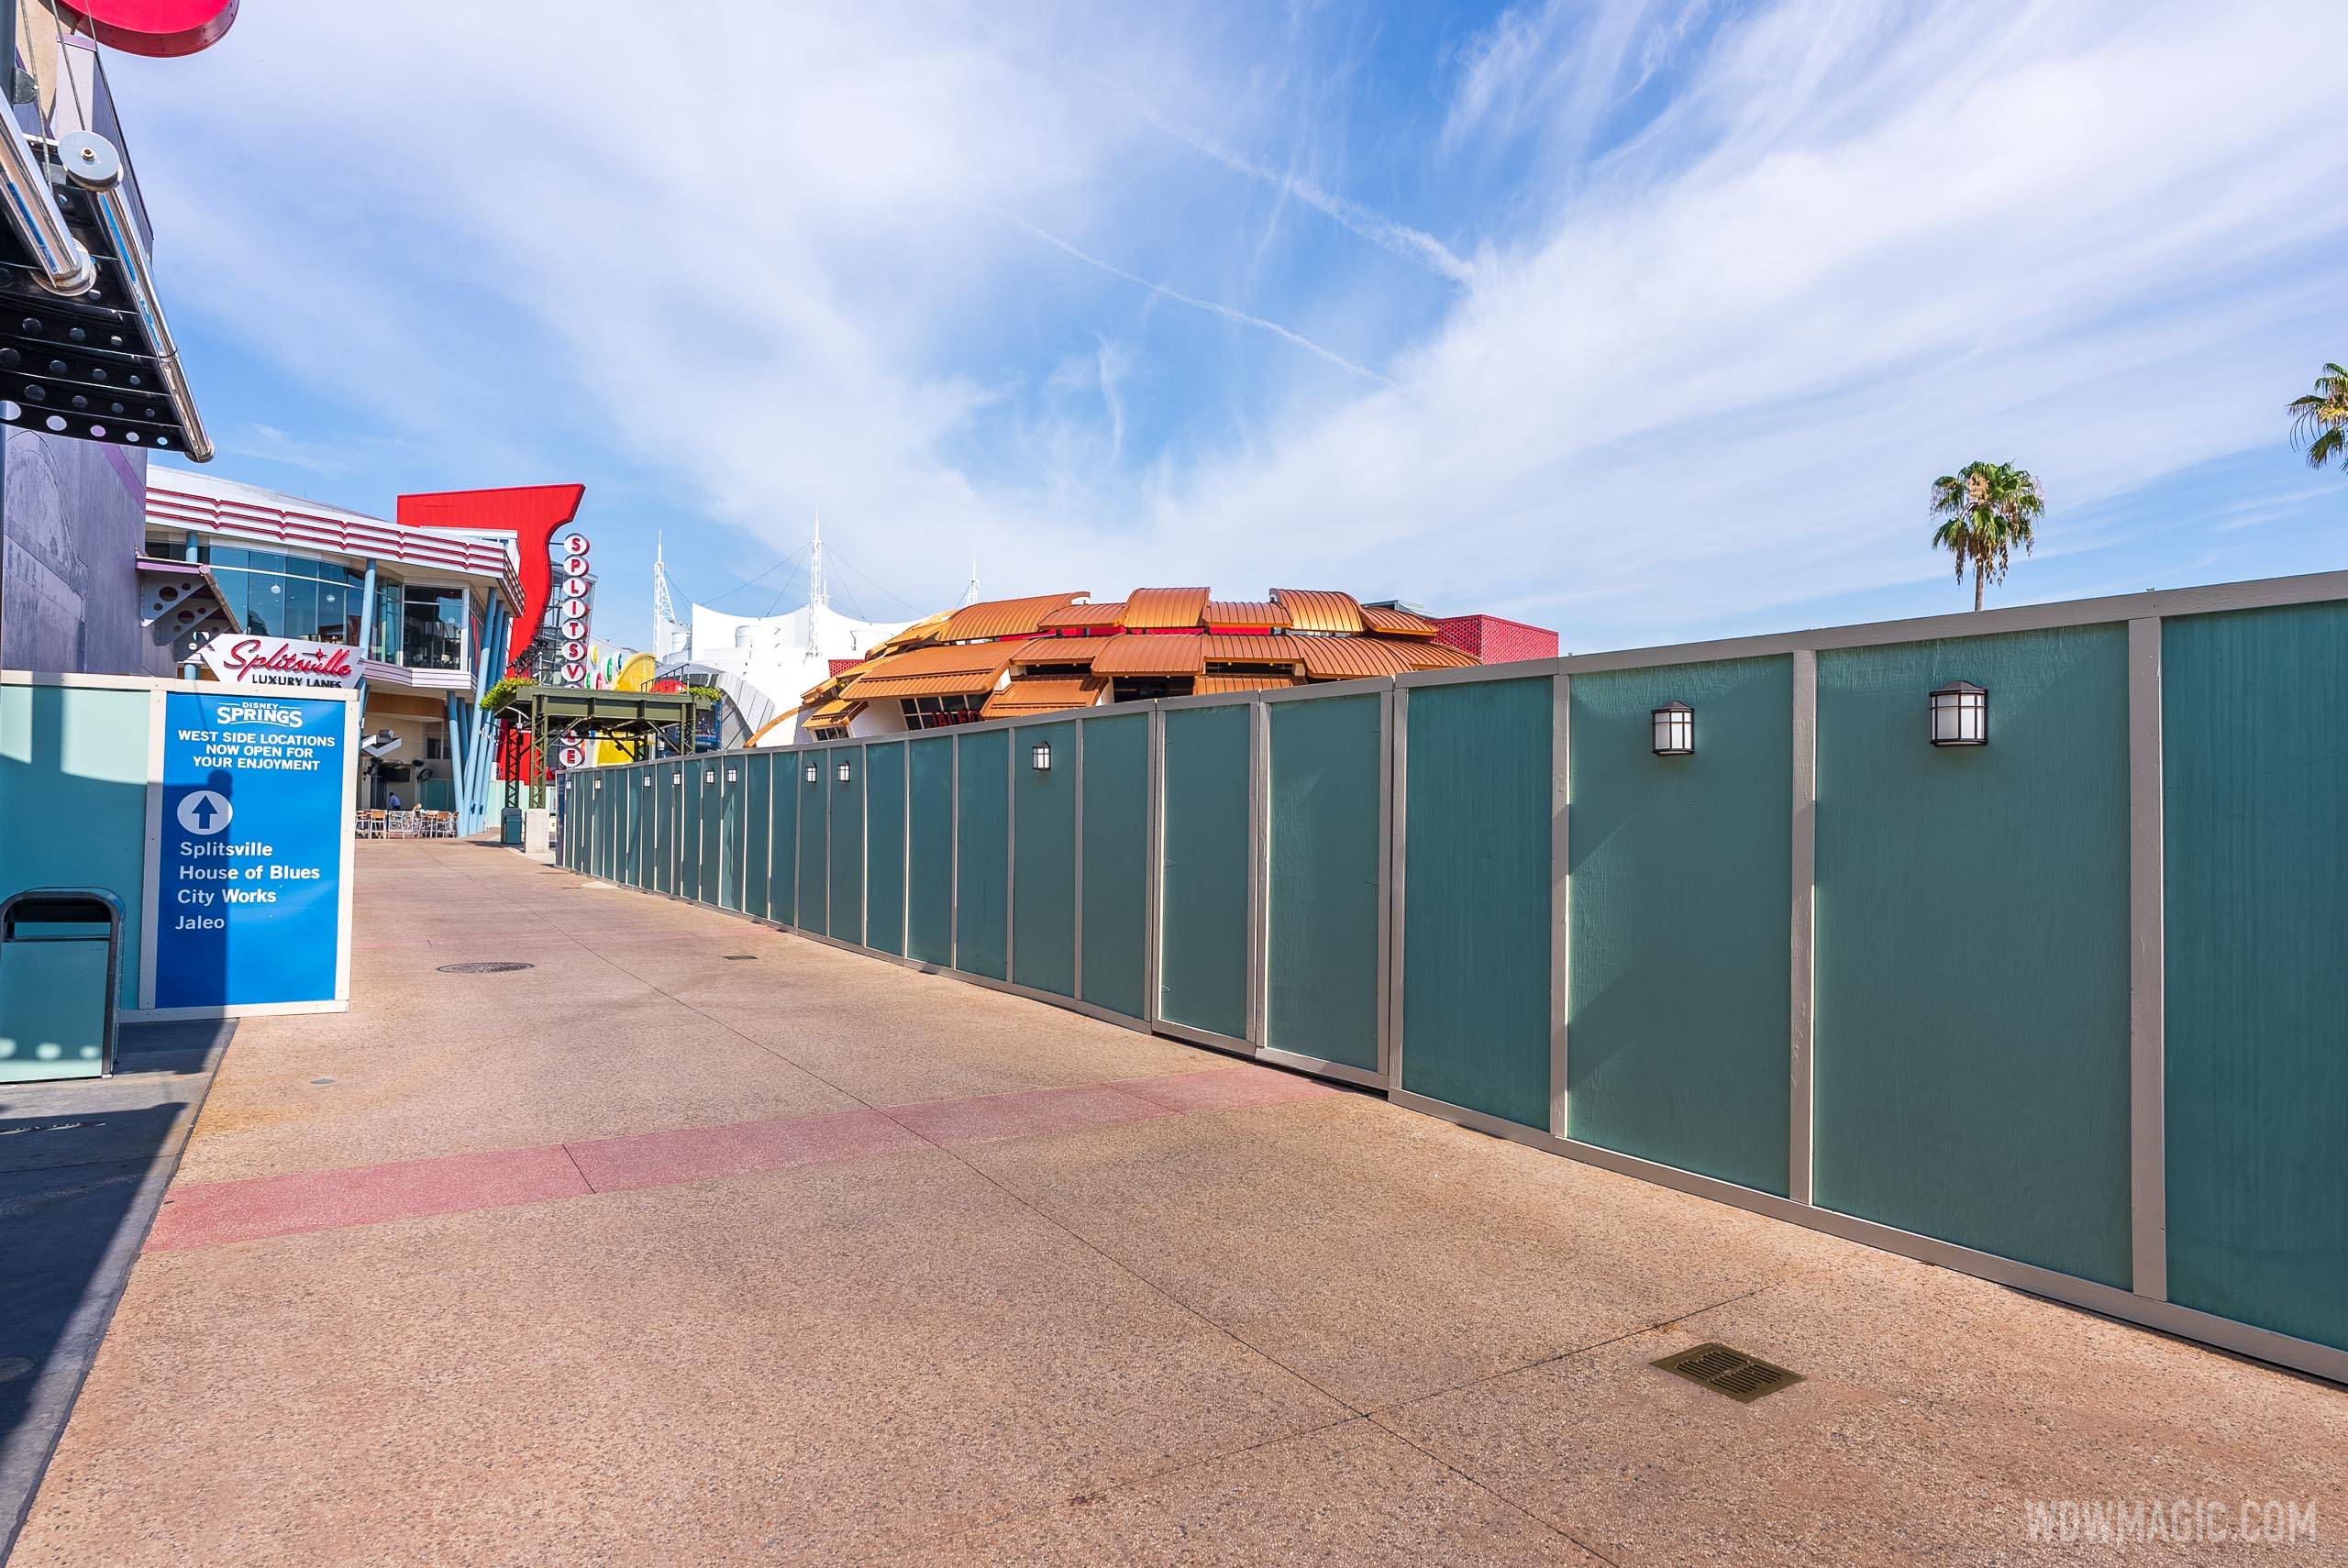 All Beatrix 'coming-soon' signs removed from the planned construction site at Disney Springs